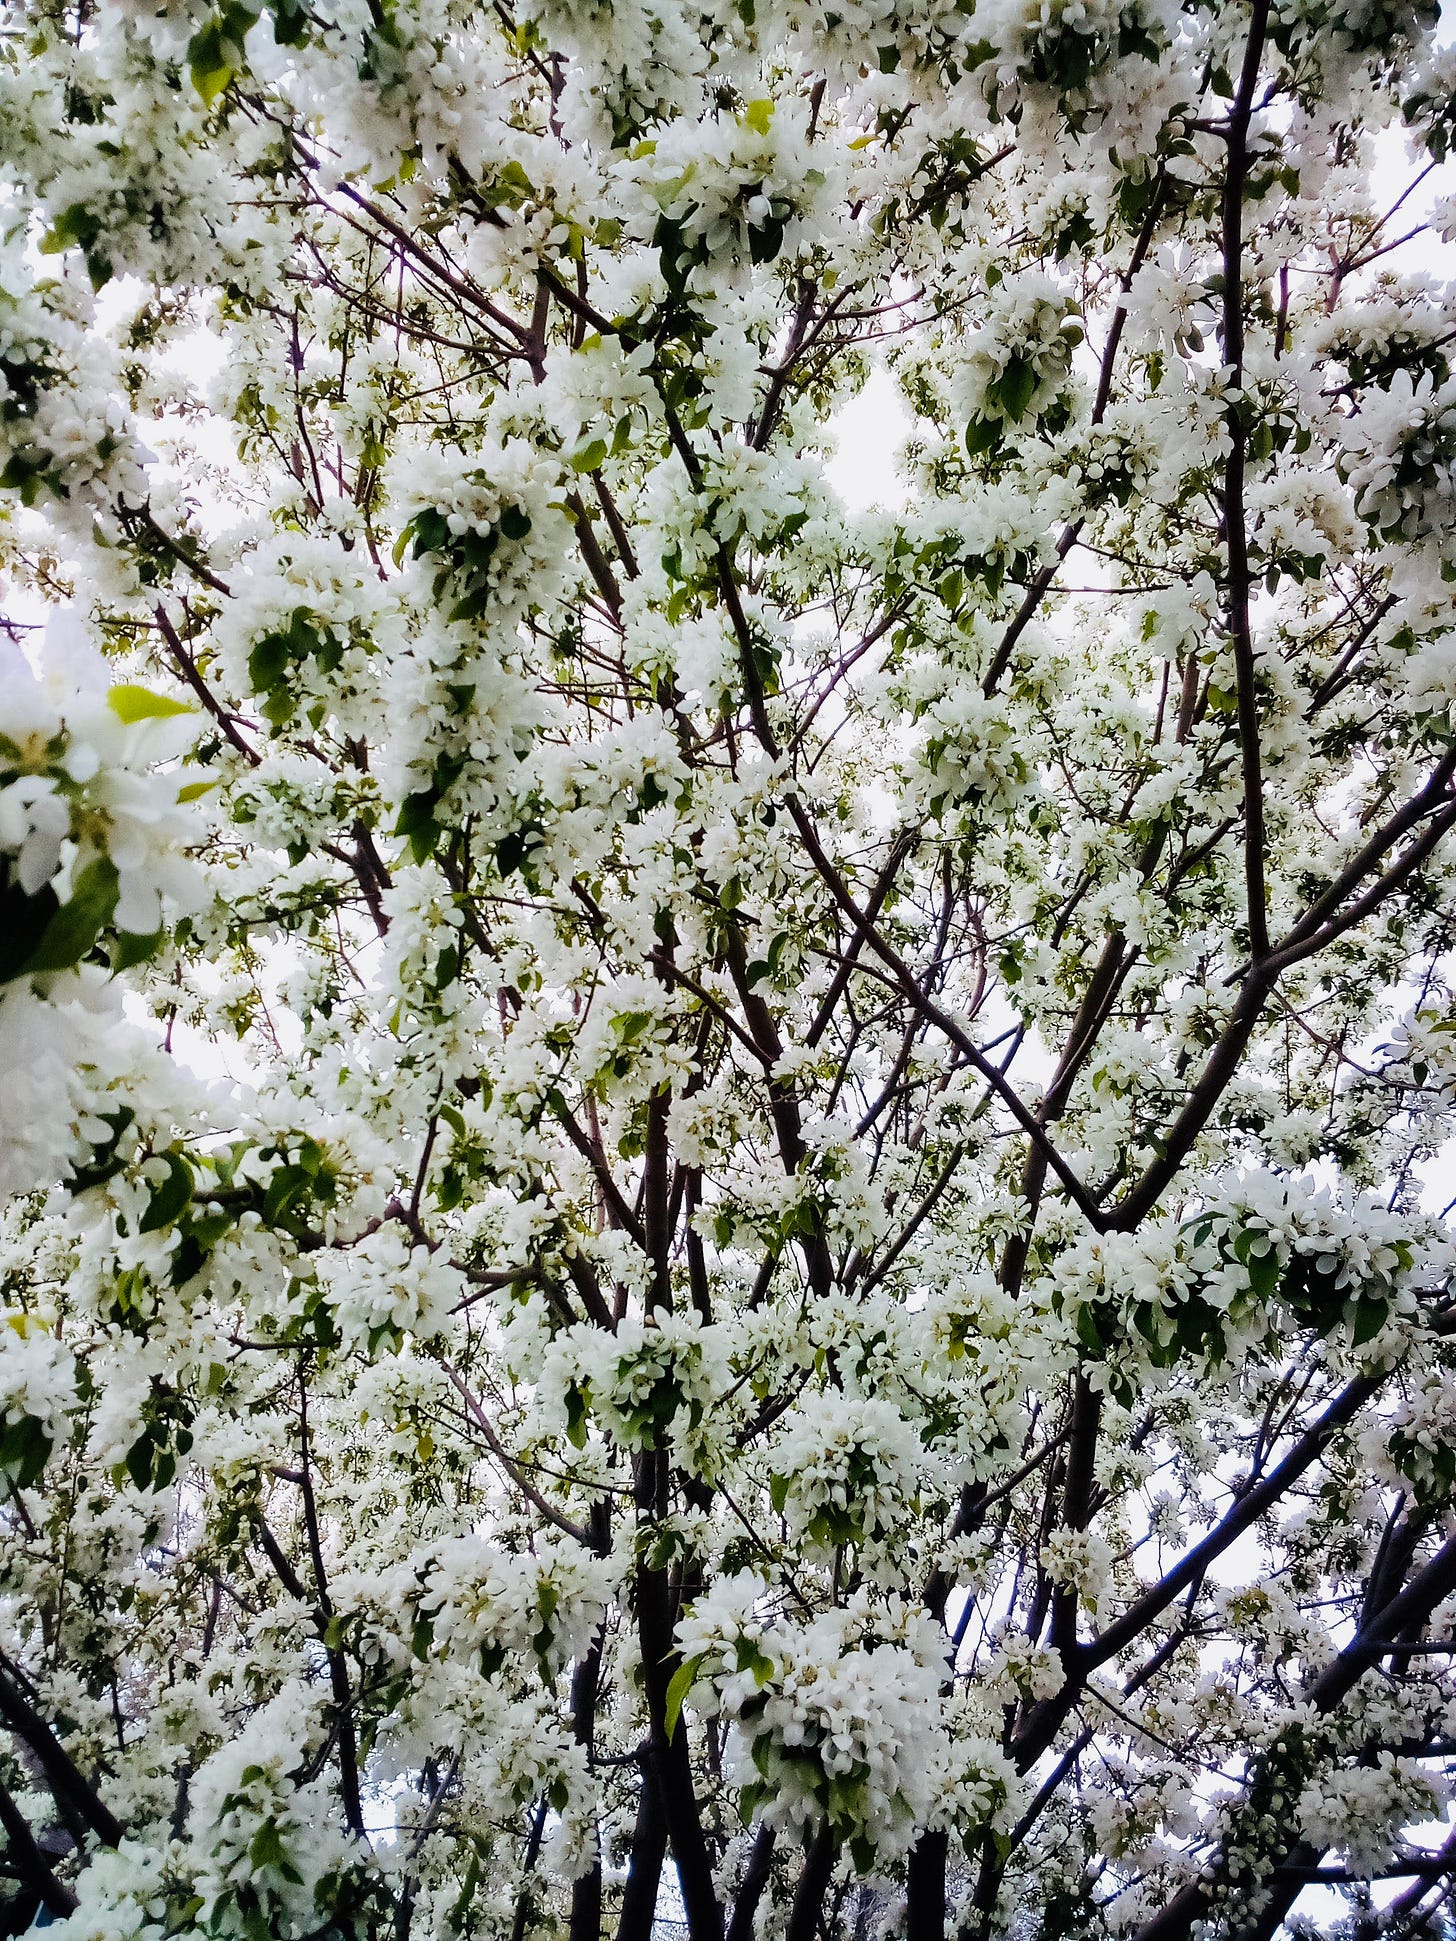 Tree covered in white blossoms